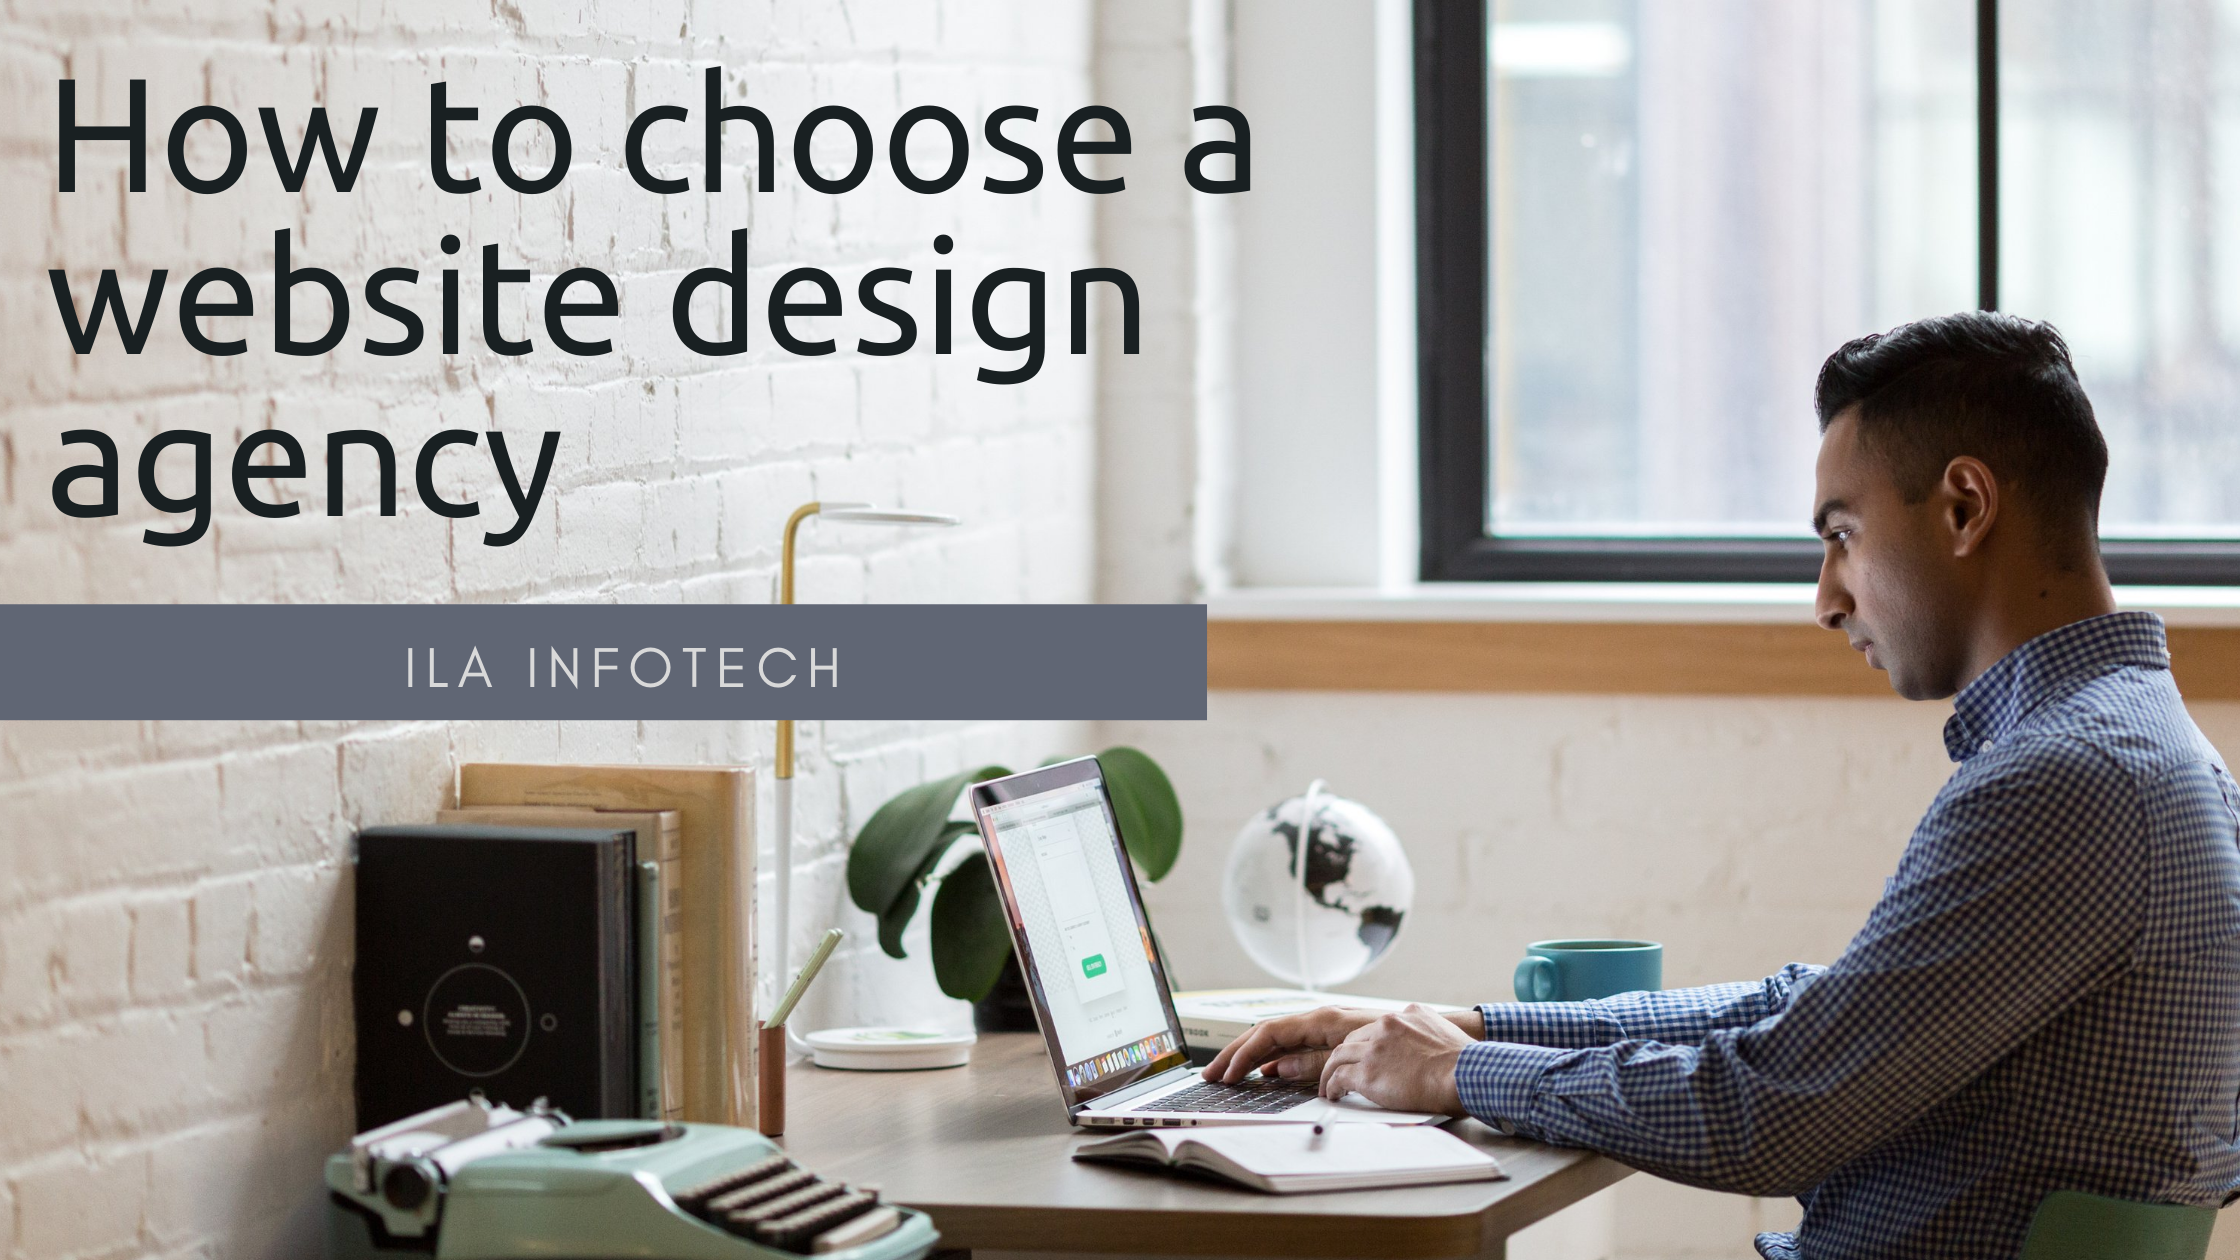 How to choose a website design agency in 2021